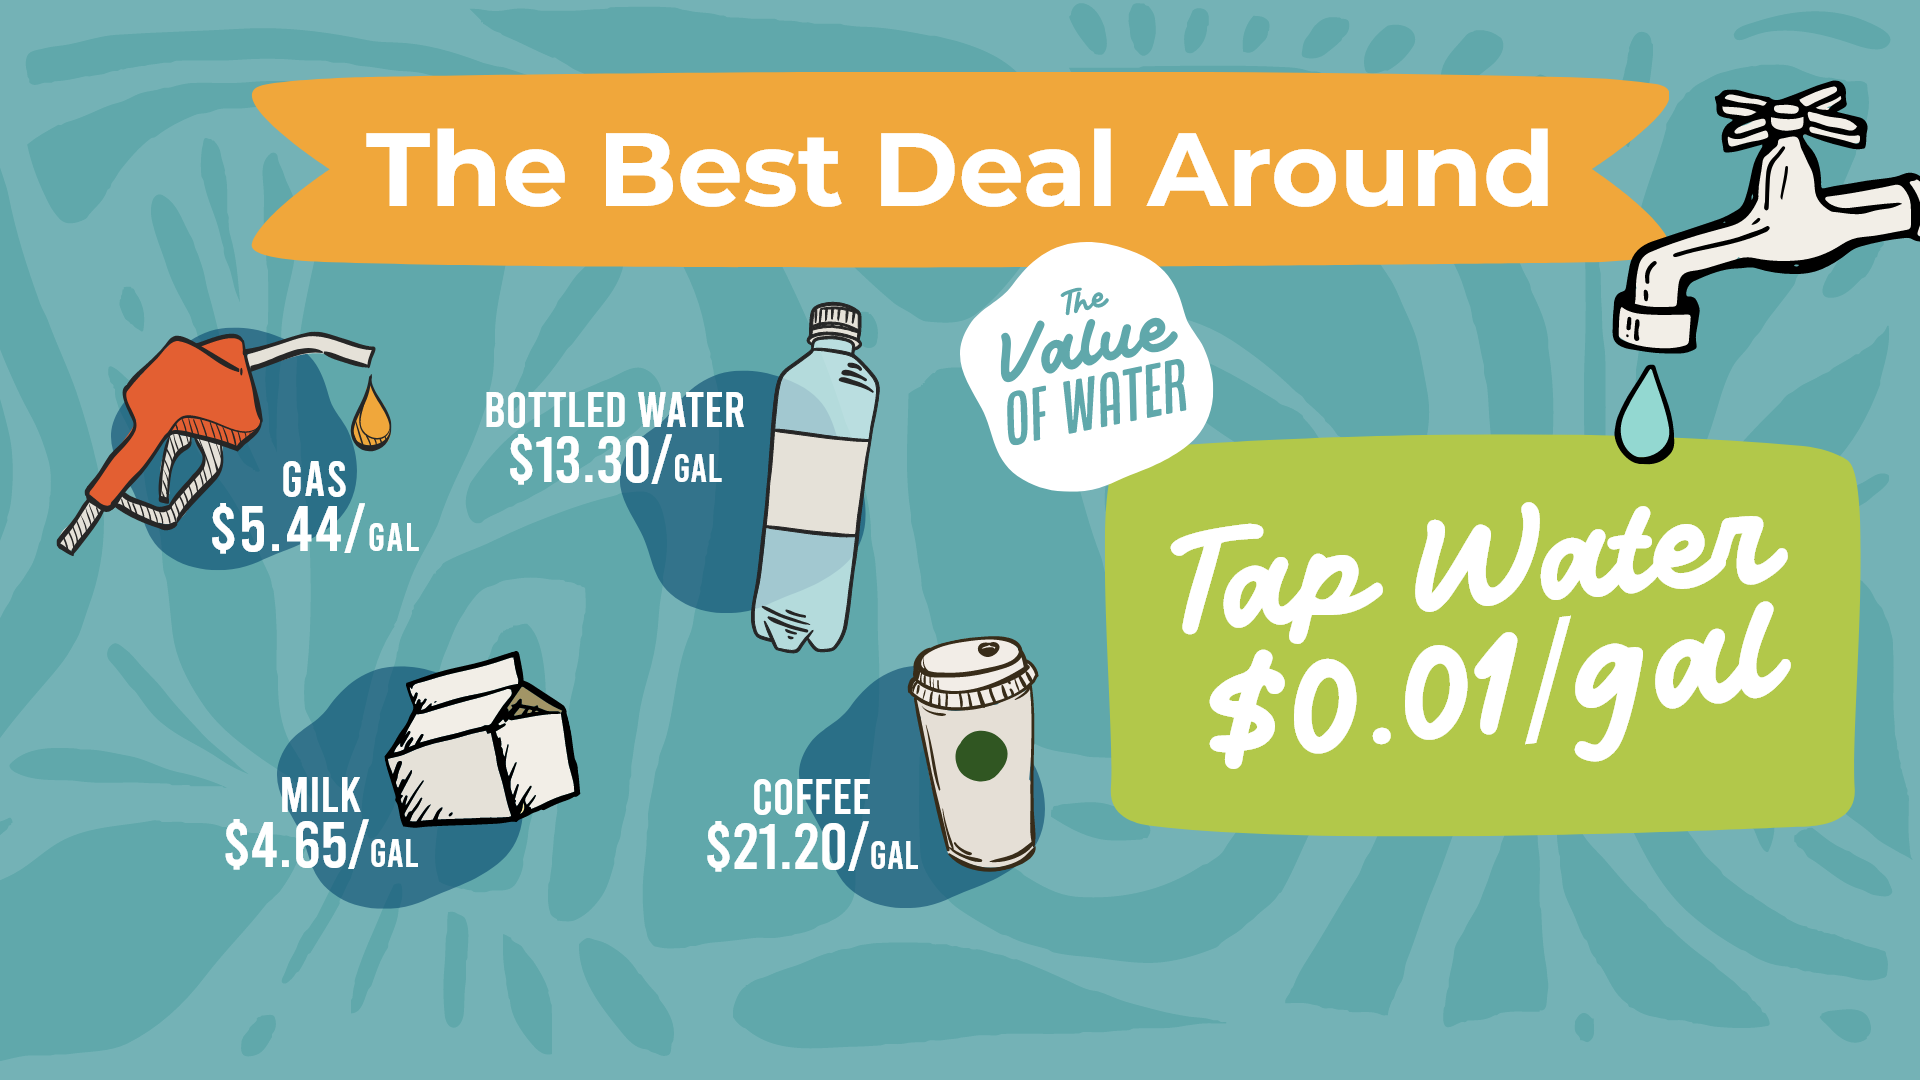 Comparison of price per gallon gas, bottled water, milk, coffee, tap water